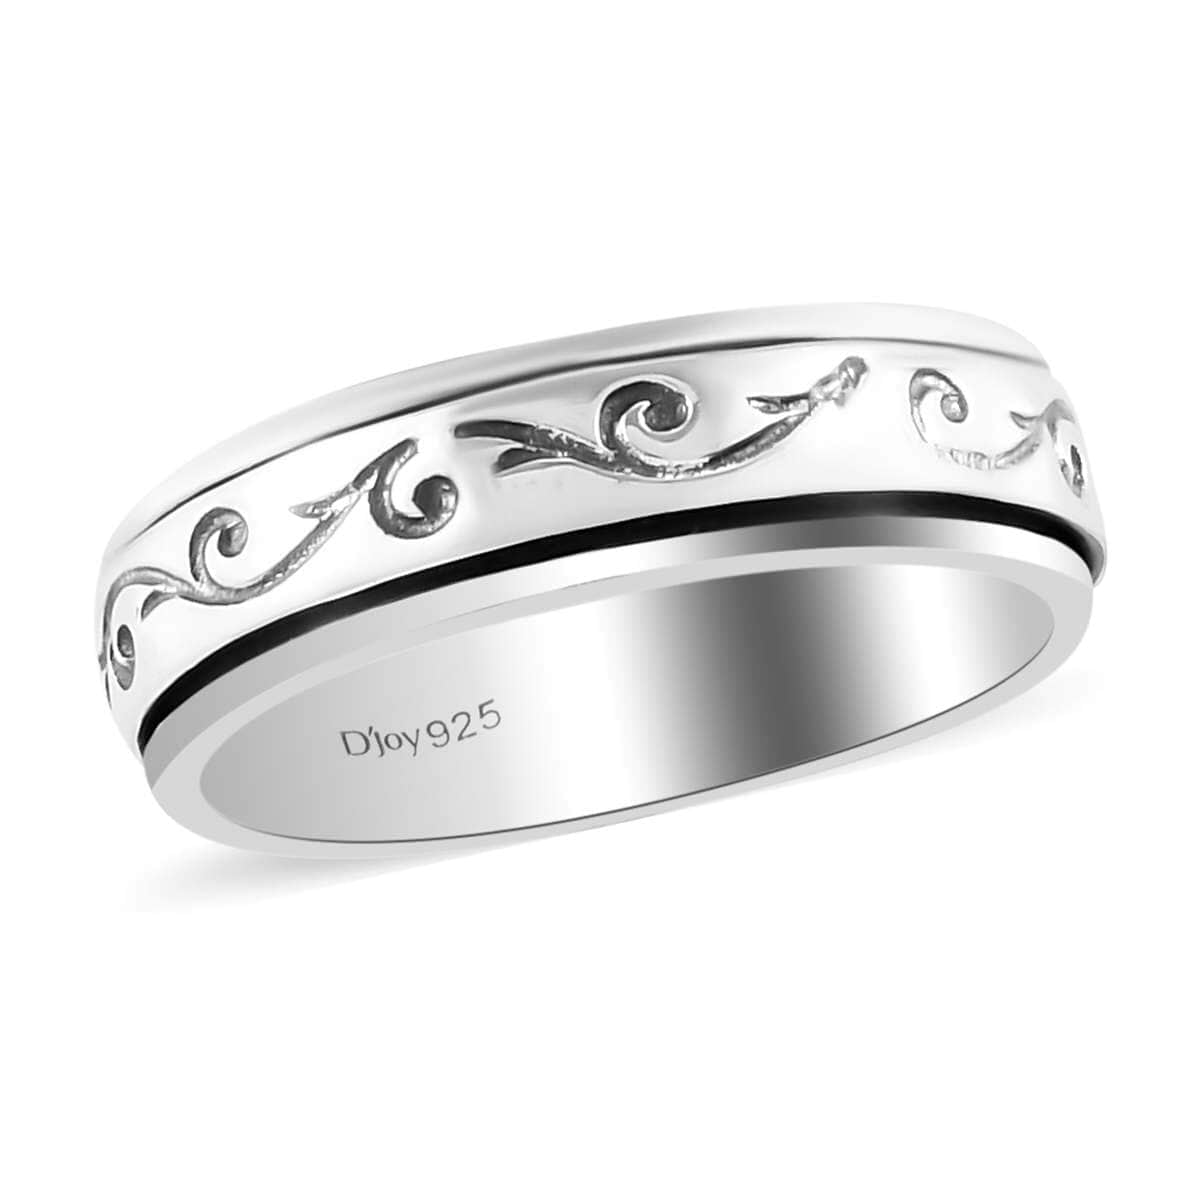 Shop LC Spinner Ring for Women - Spinning Anxiety Ring for Men - Wedding  Band 925 Sterling Silver Platinum Plated Cross Faith Jewelry Stress Relief  Size 8 Valentine Gifts 